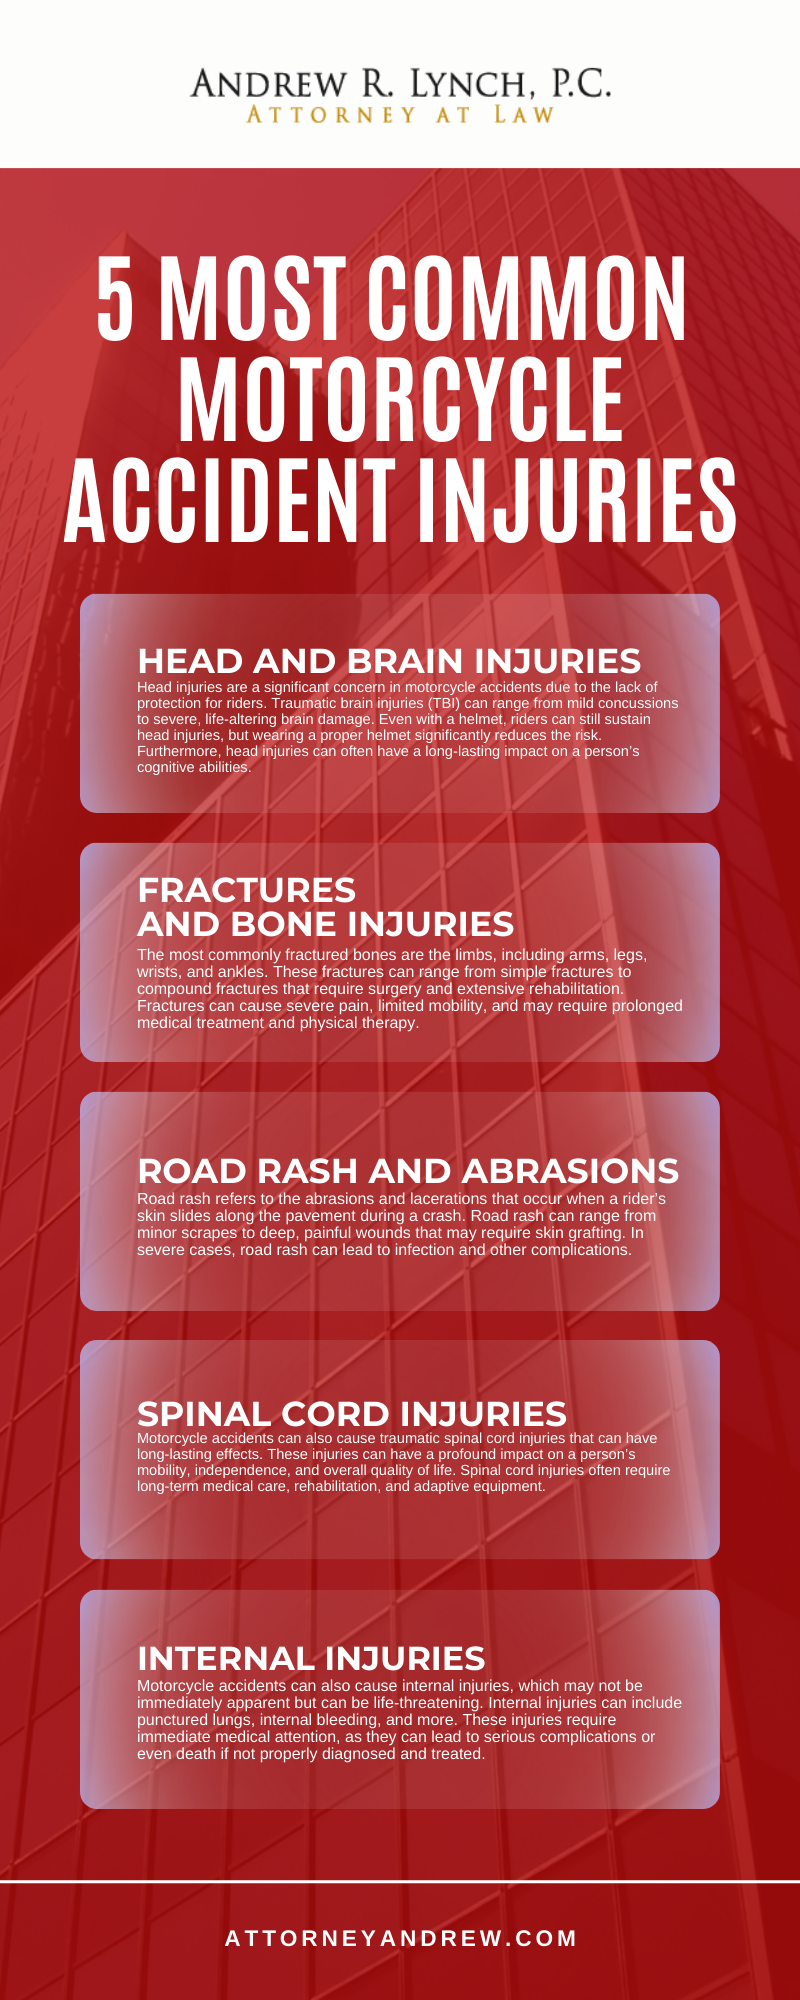 5 Most Common Motorcycle Accident Injuries Infographic